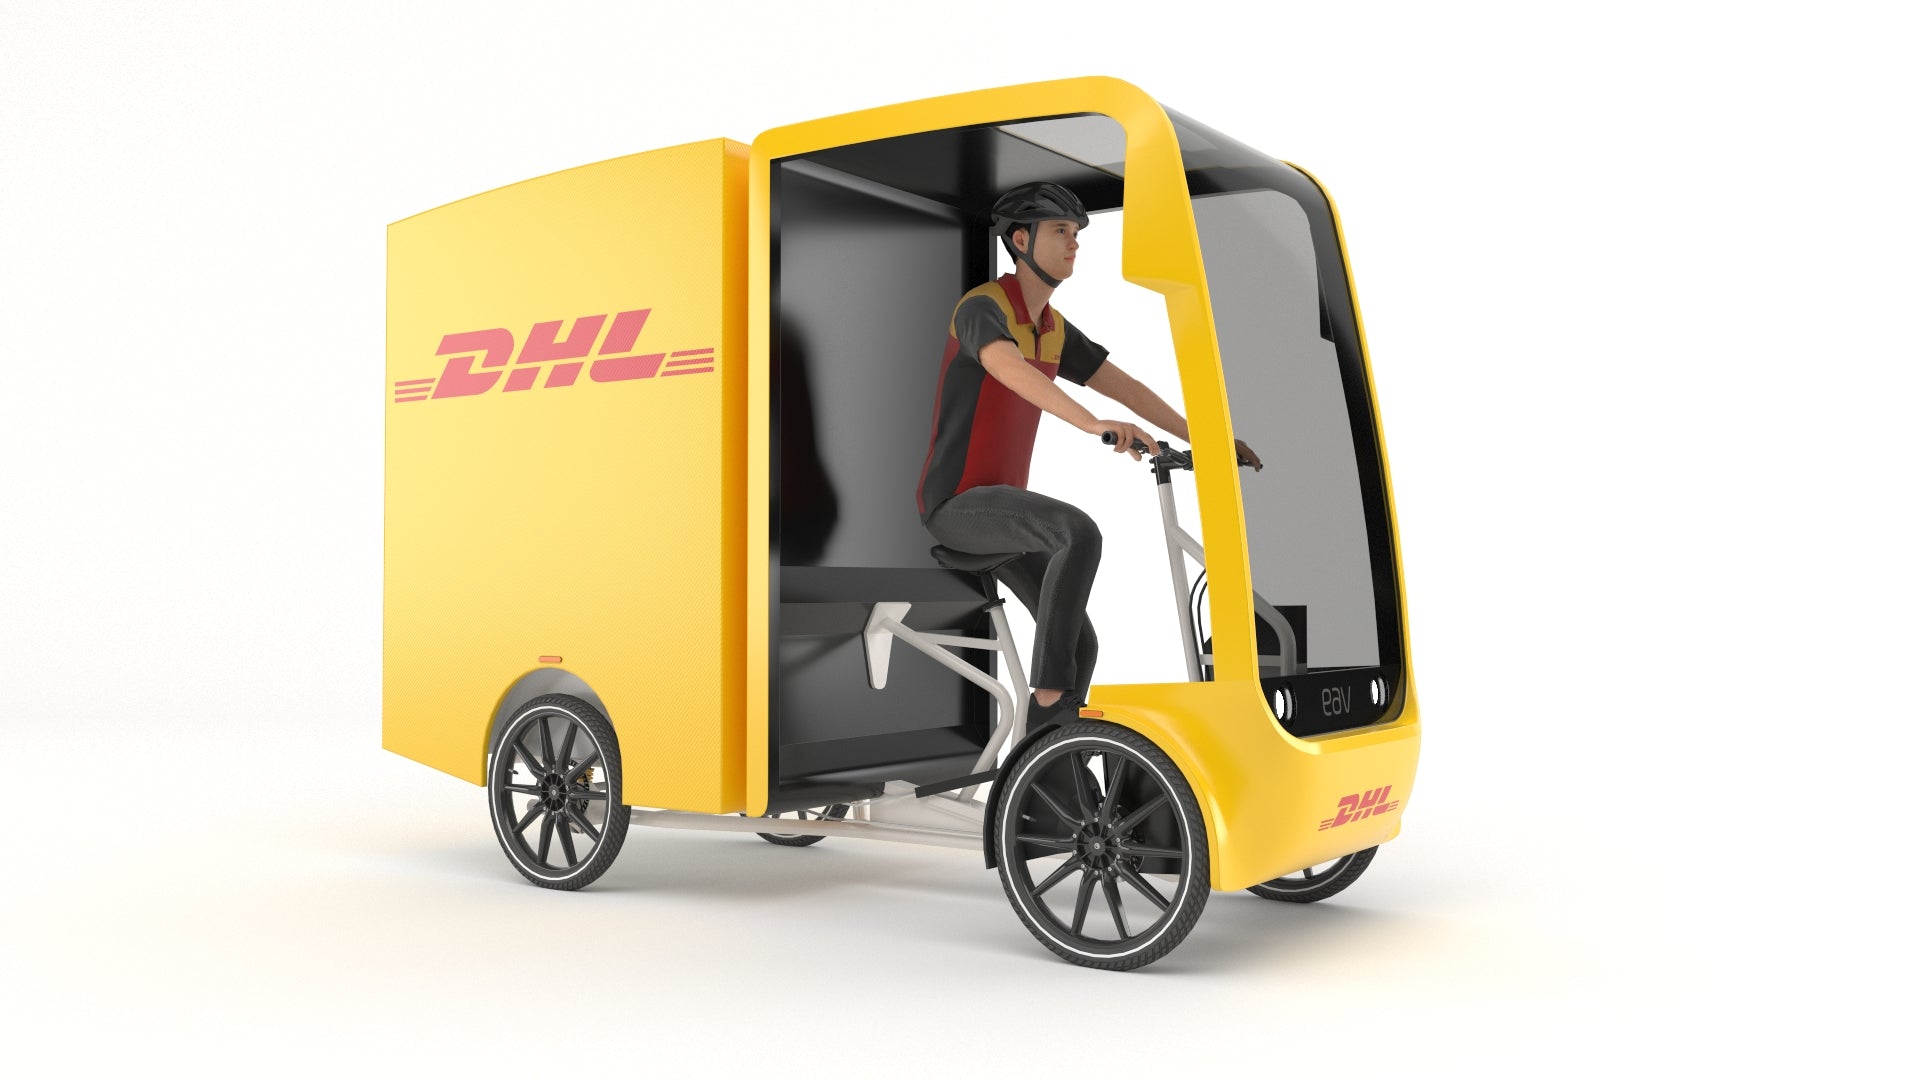 DHL Delivery man in e-bike